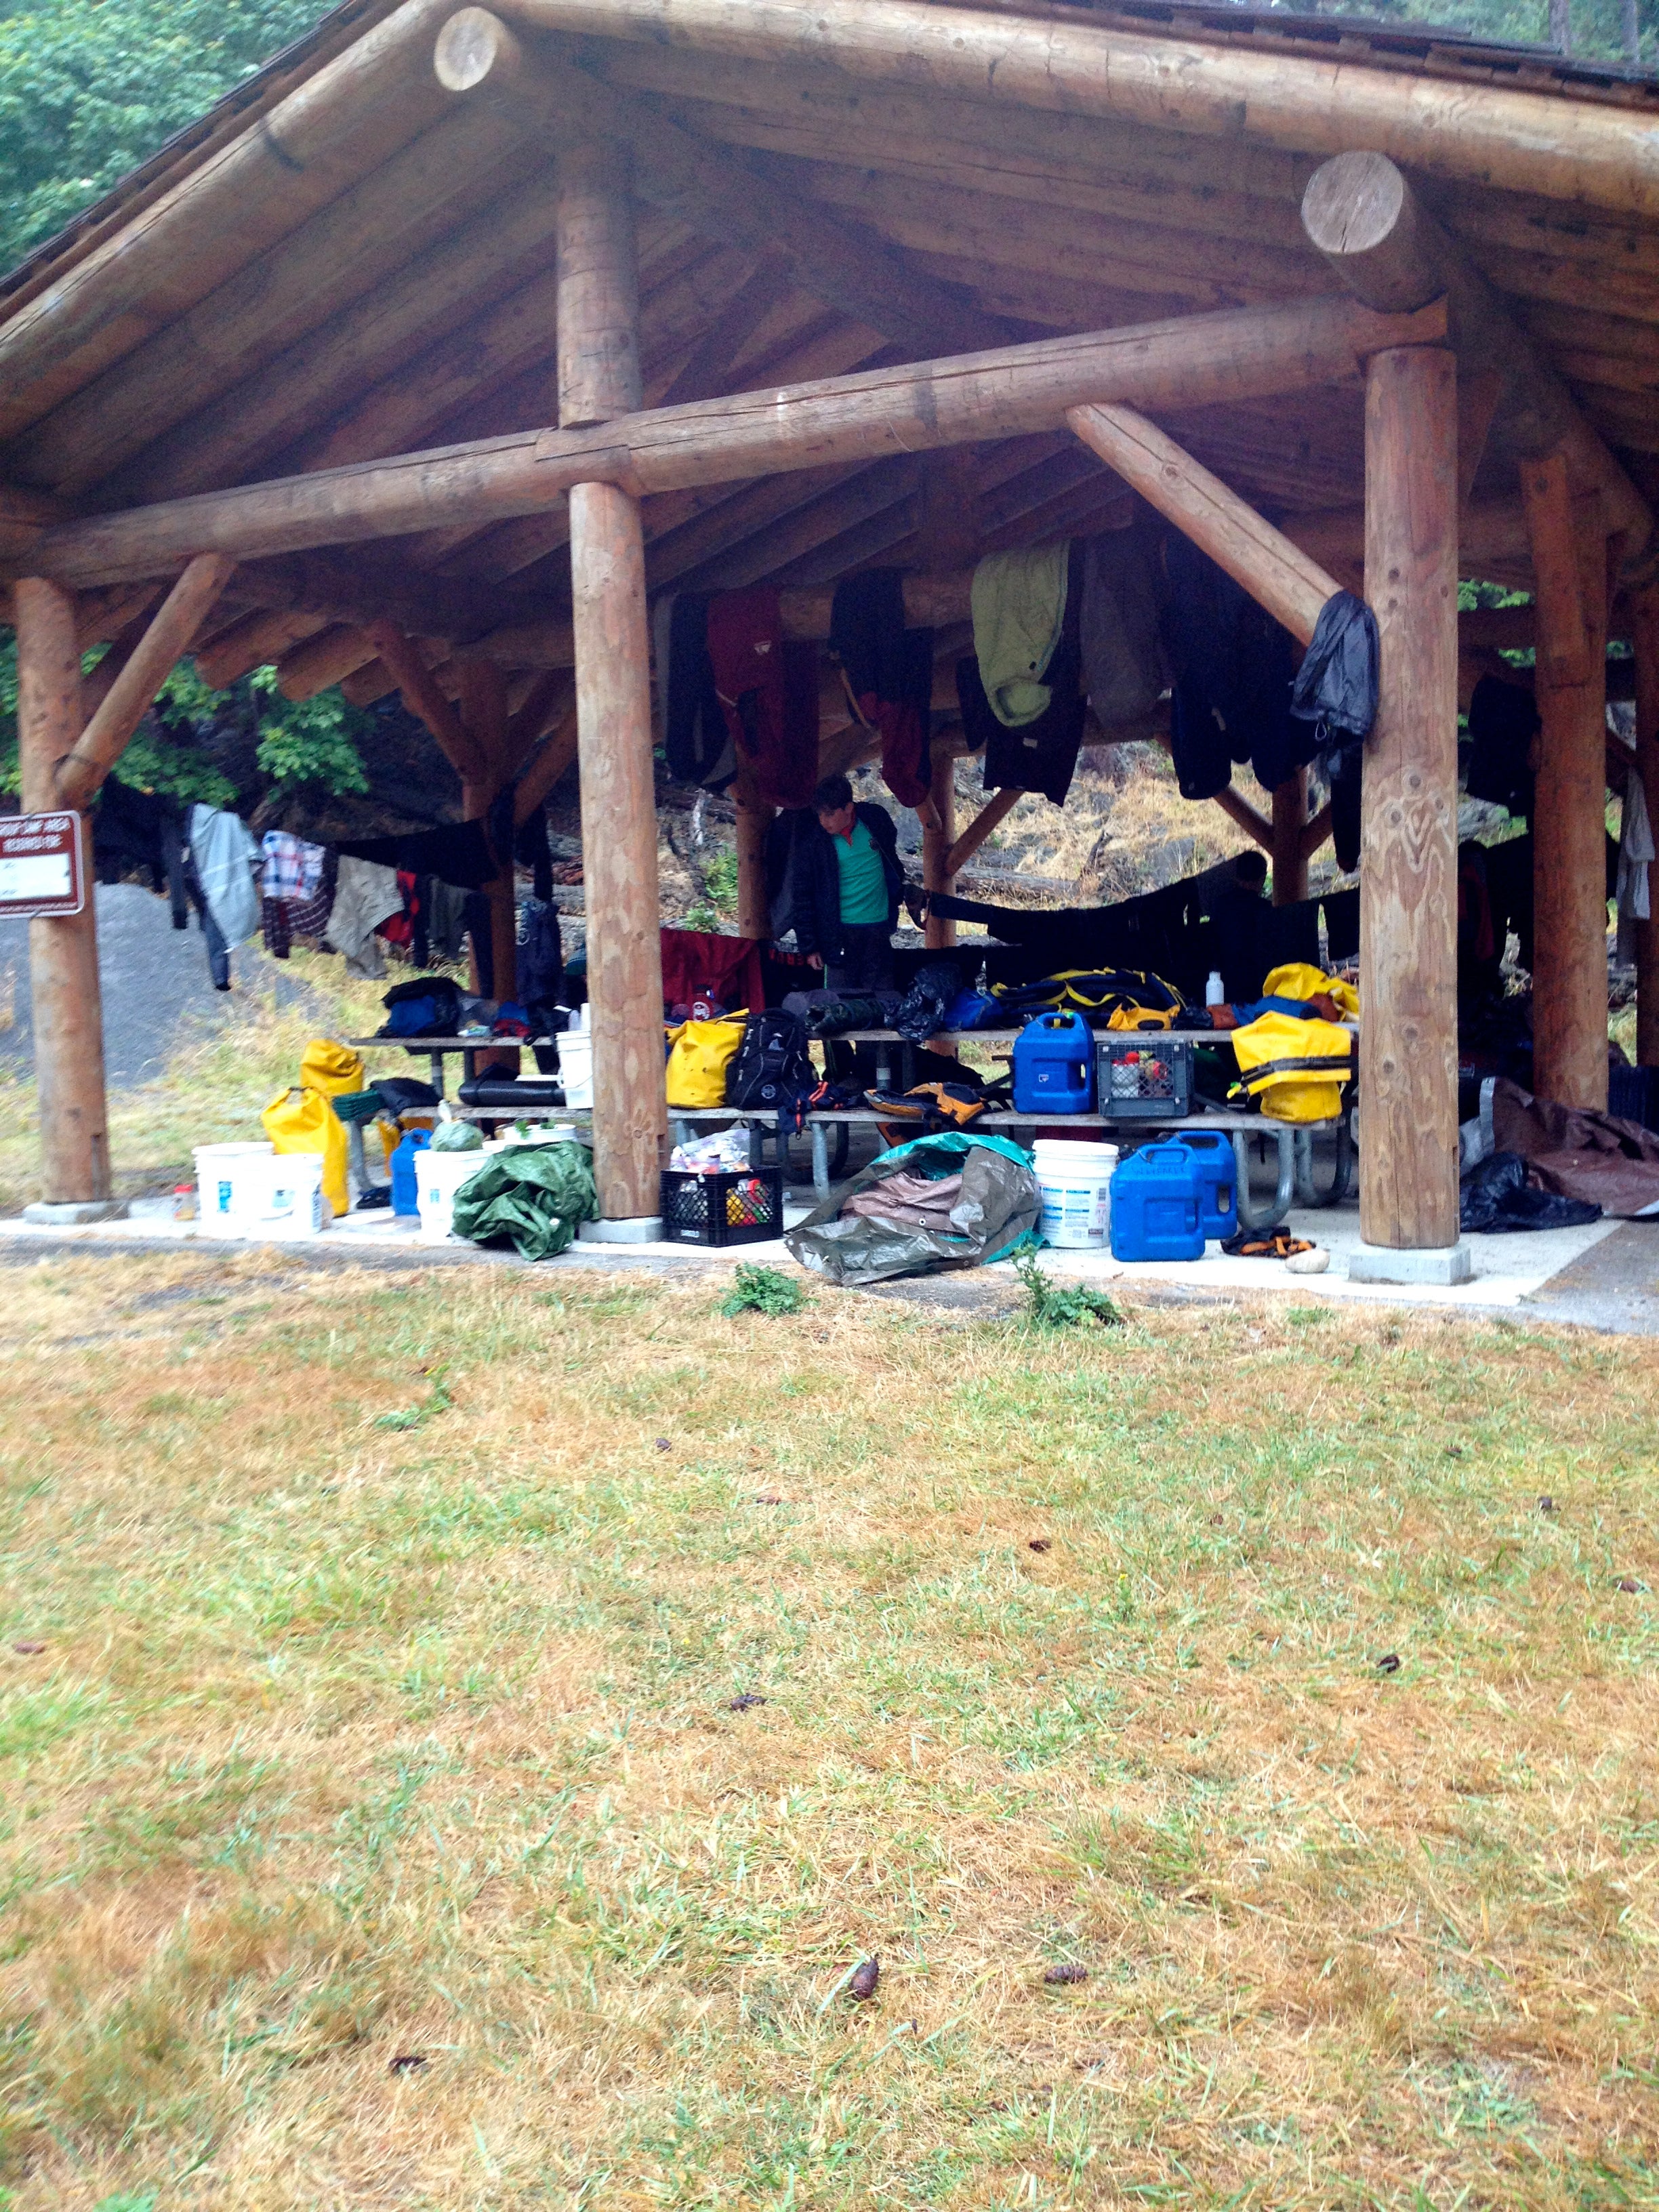 Northern picnic shelter- great for drying wet equipment on a rainy day